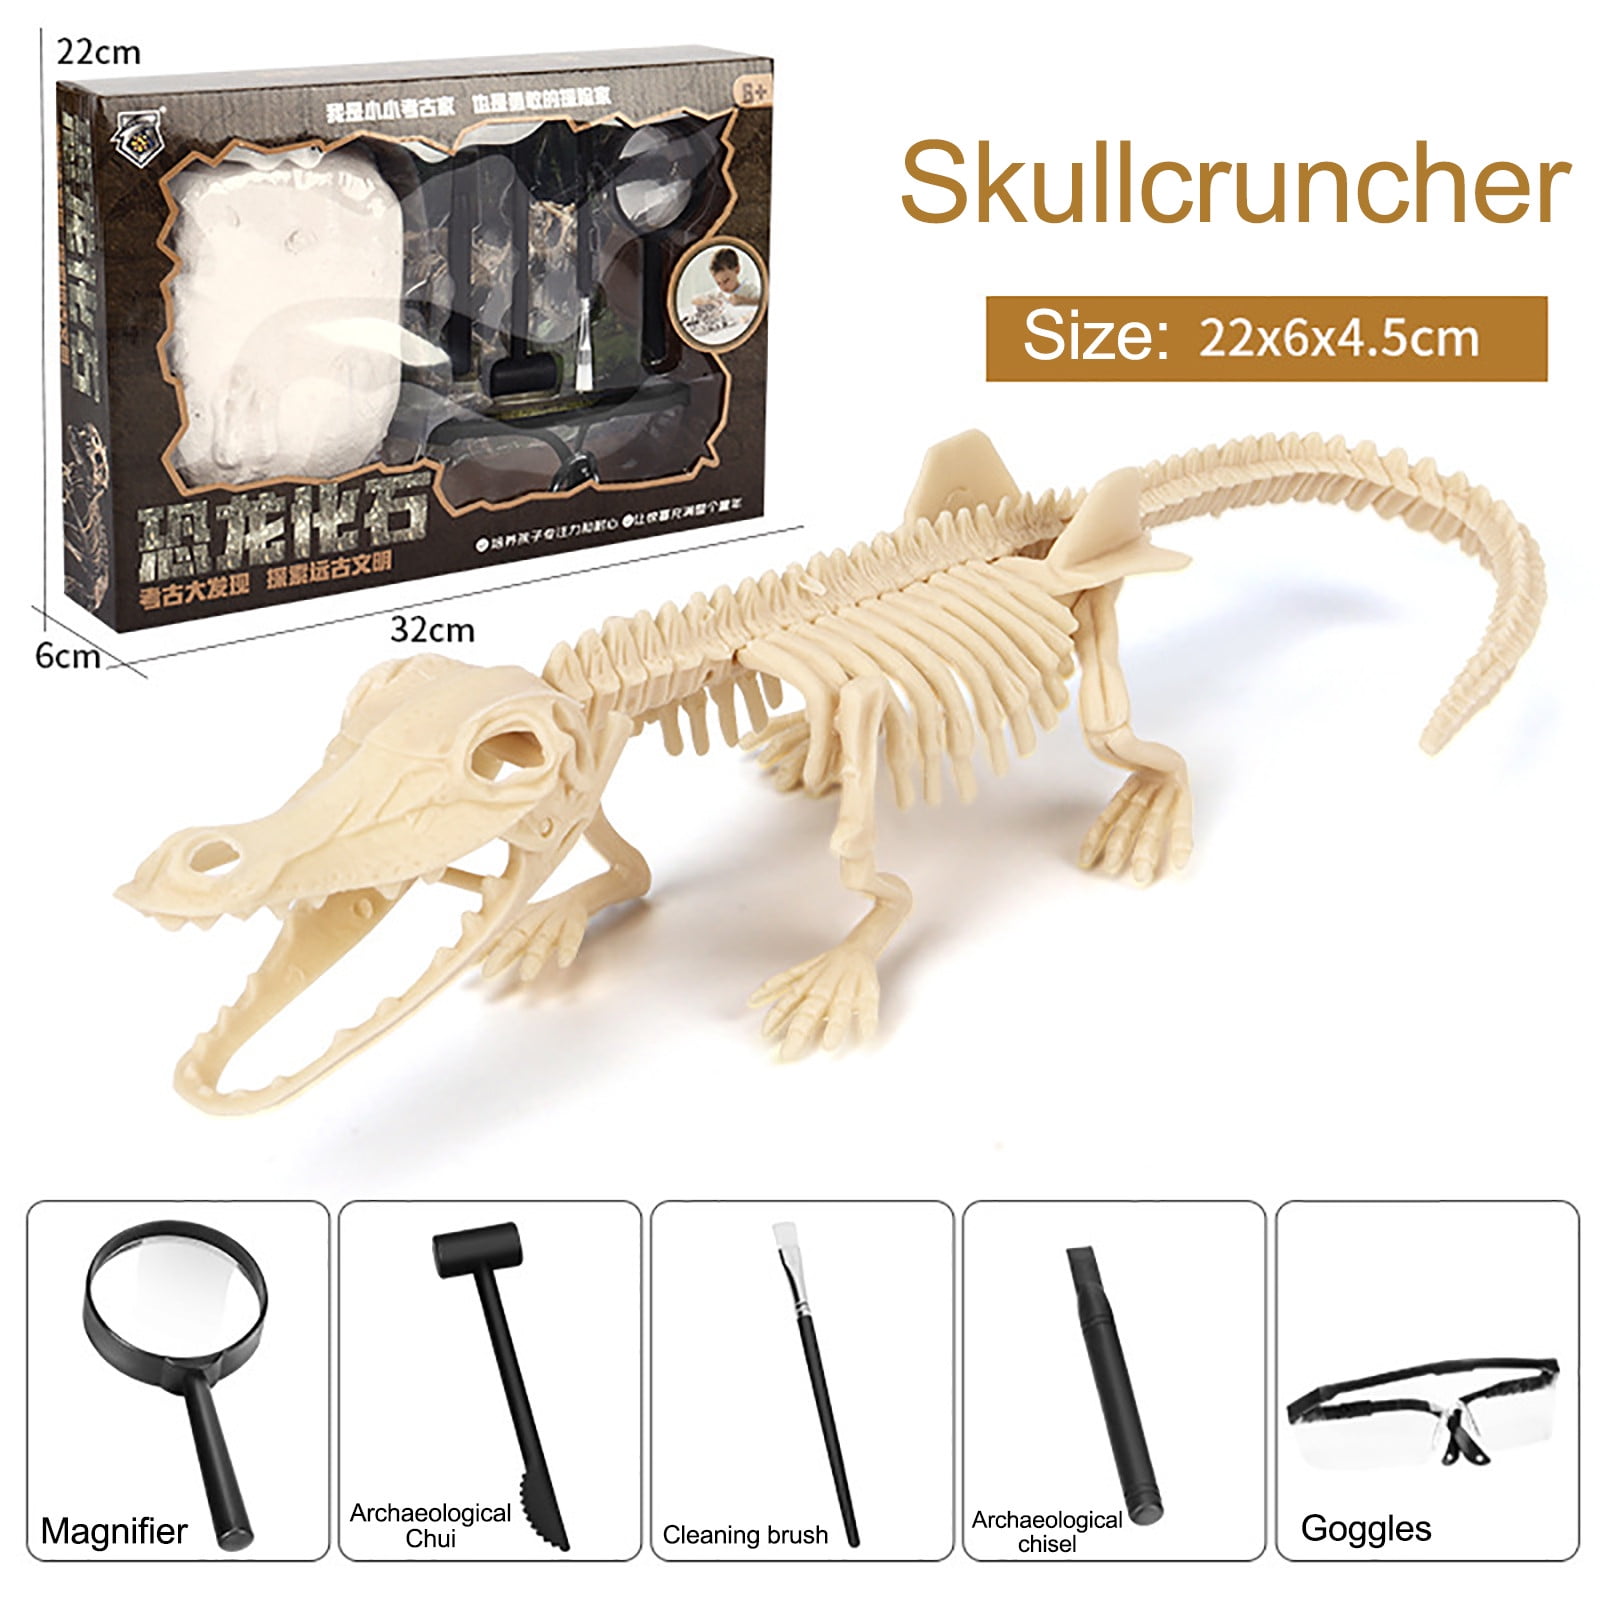 Archaeological Toy Dig and assemble Dinosaur Fossil Kit Choice of Dinosaurs 